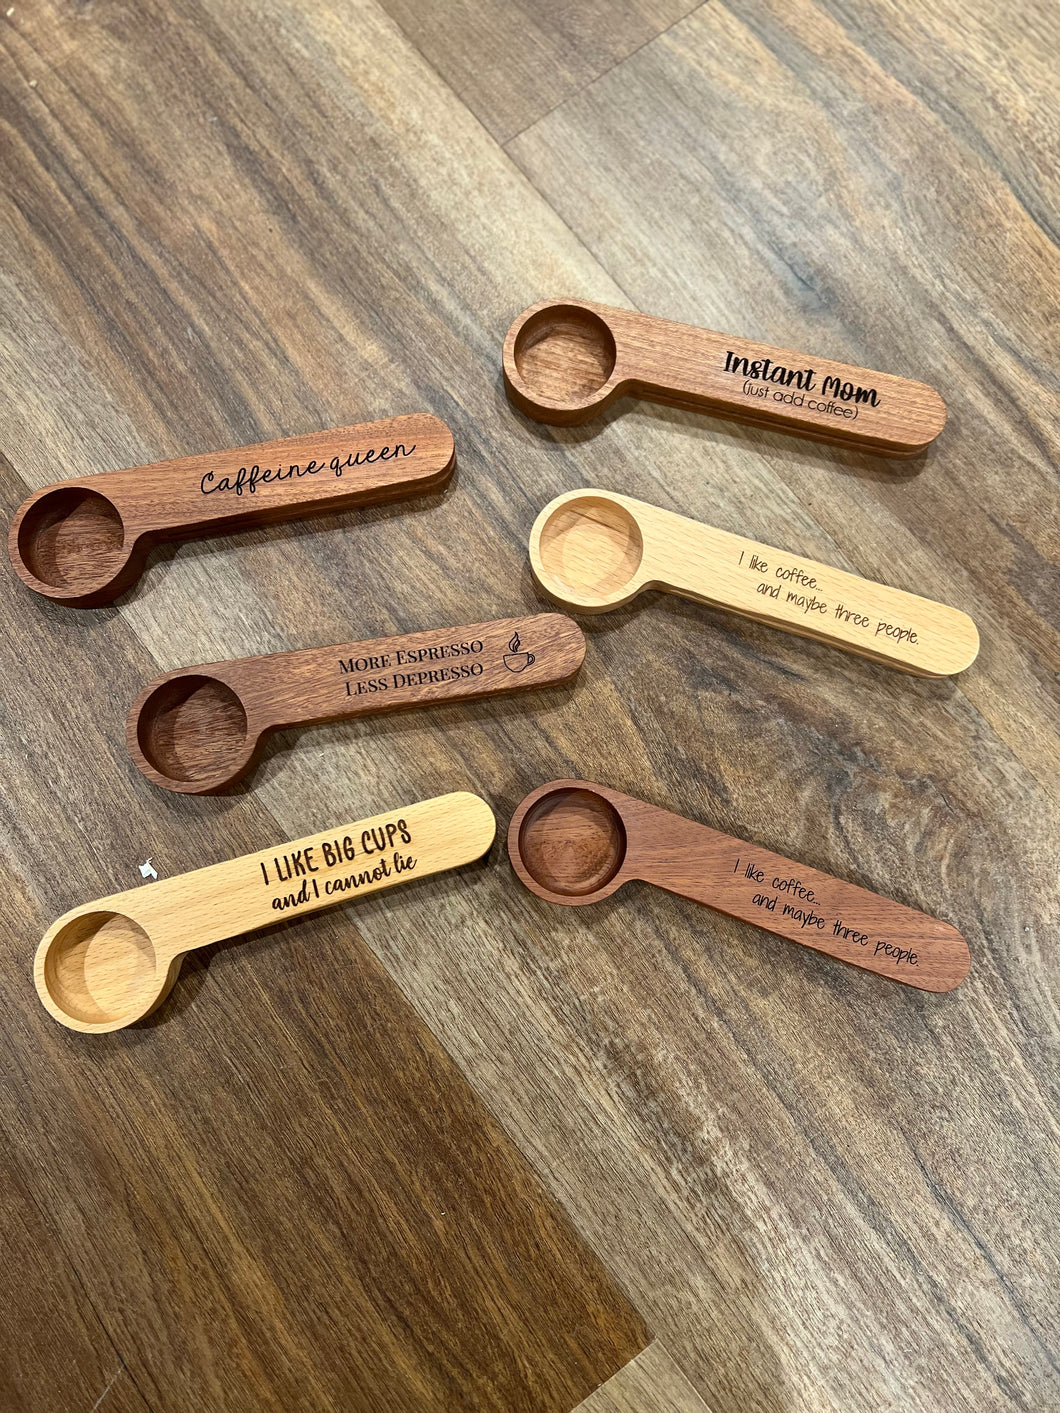 Engraved coffee scoops